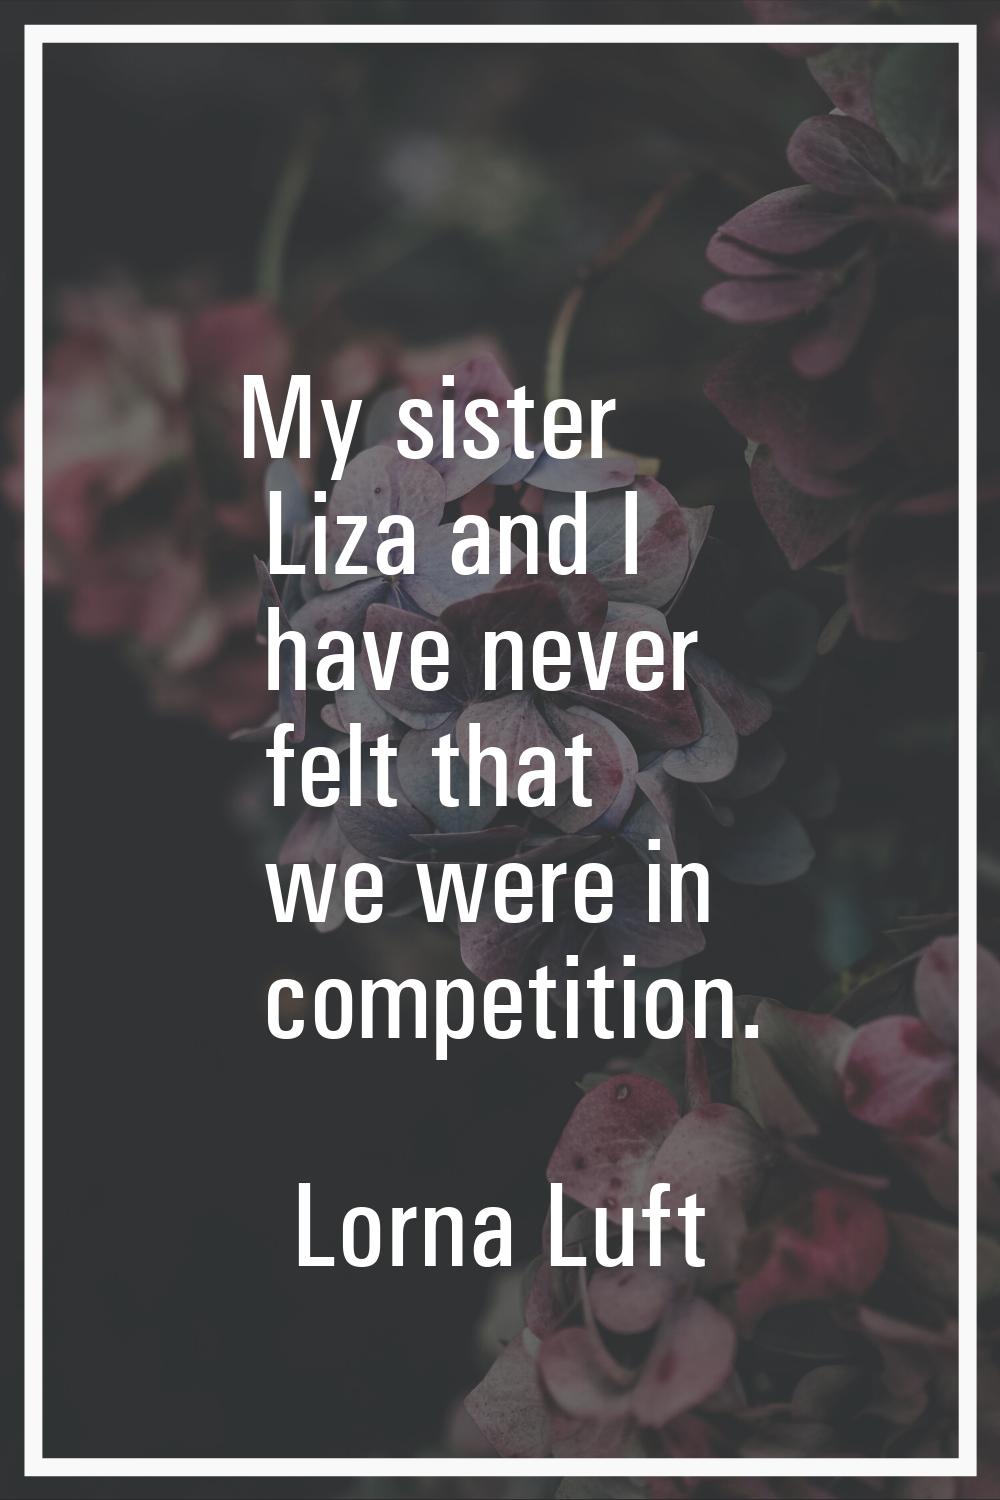 My sister Liza and I have never felt that we were in competition.